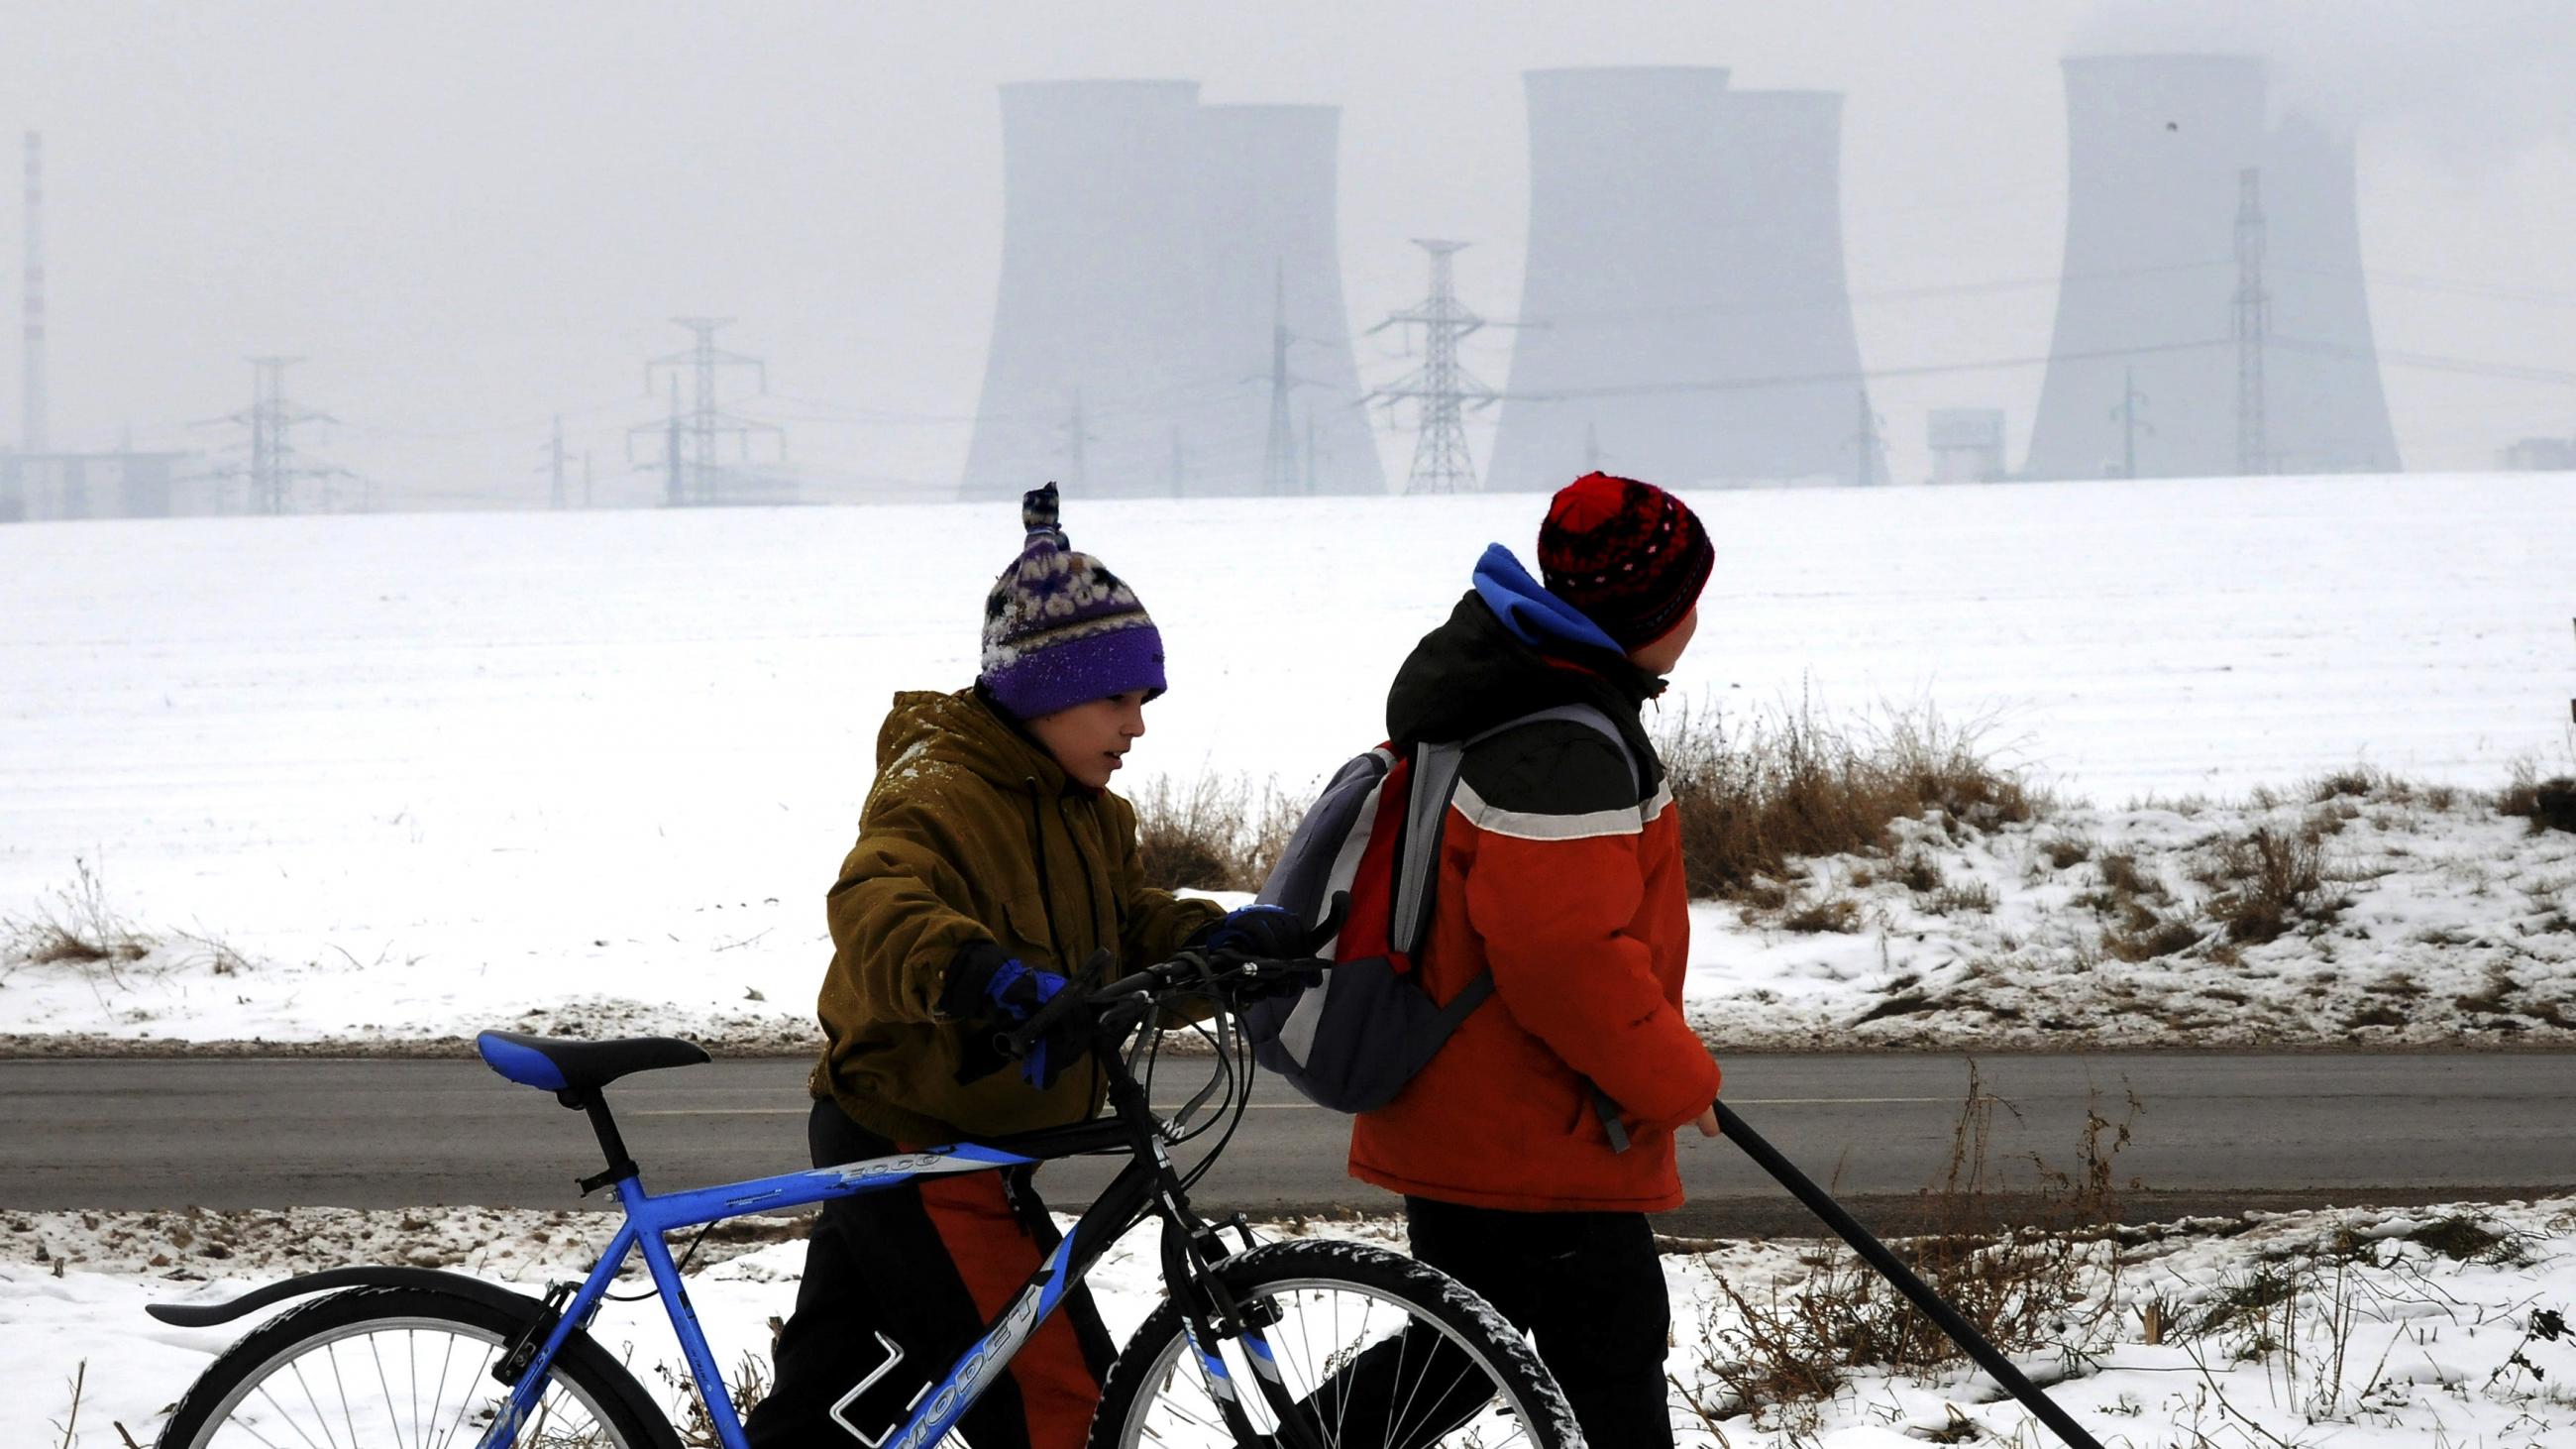 Two young boys, on in a red coat with a hockey stick and one in a brown coat with a blue bicycle walk along a snowy path next to a river. On the other side of the river, shrouded in fog are six cooling towers of a nuclear power plant